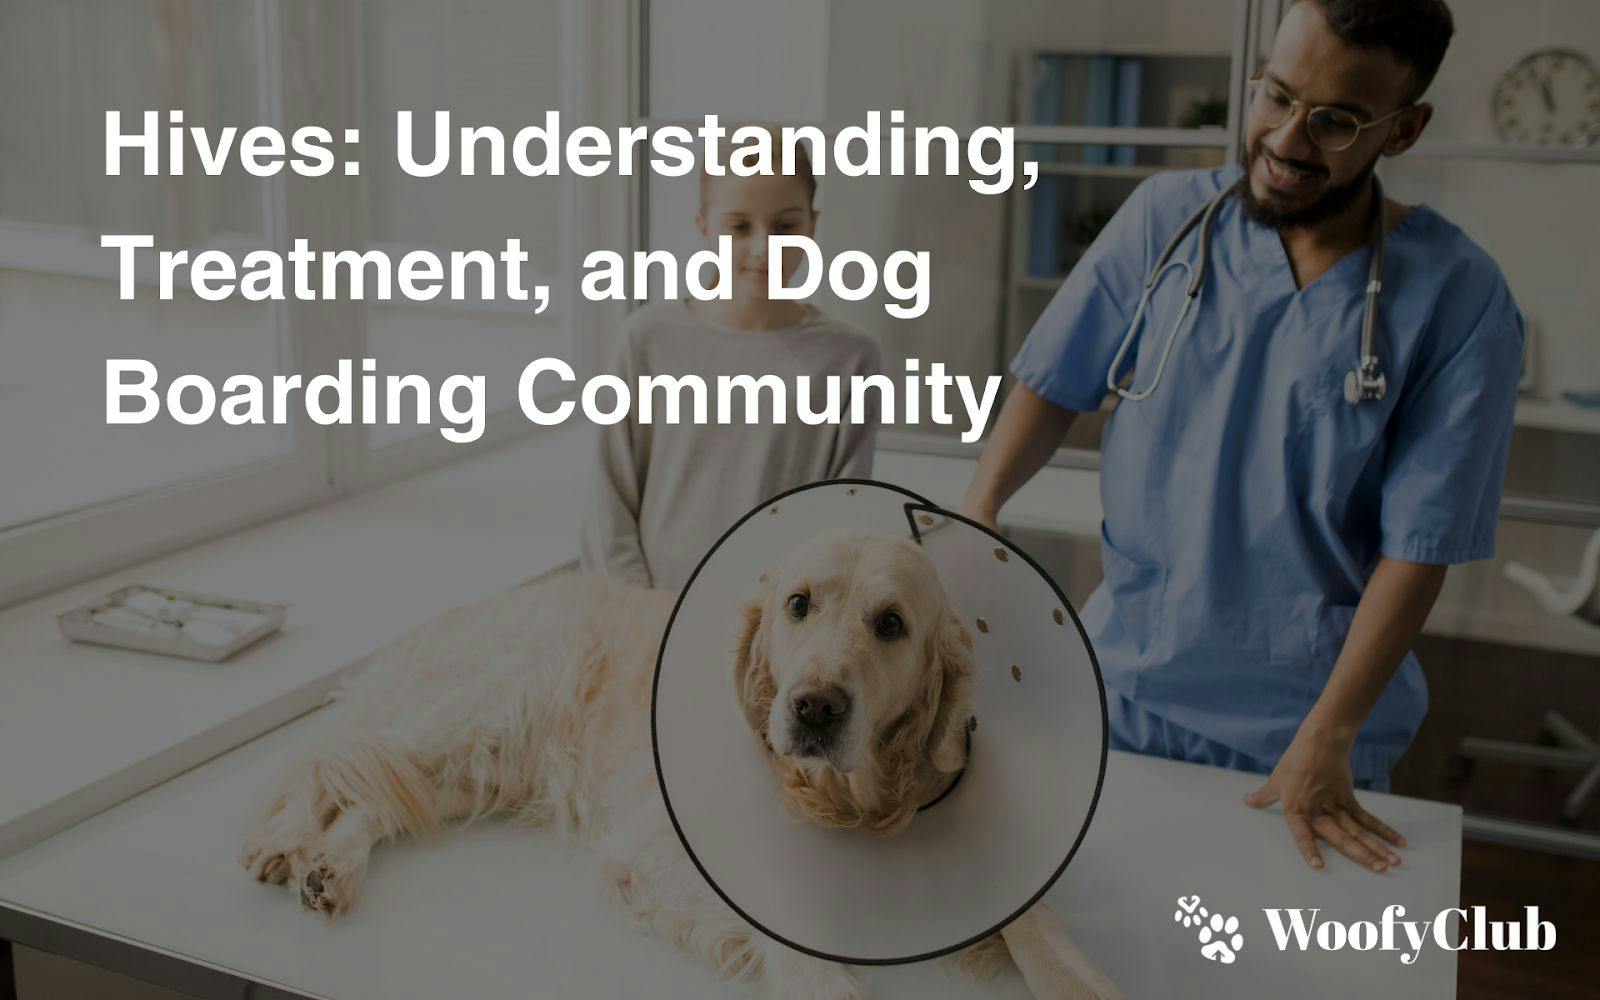 Hives: Understanding, Treatment, And Dog Boarding Community